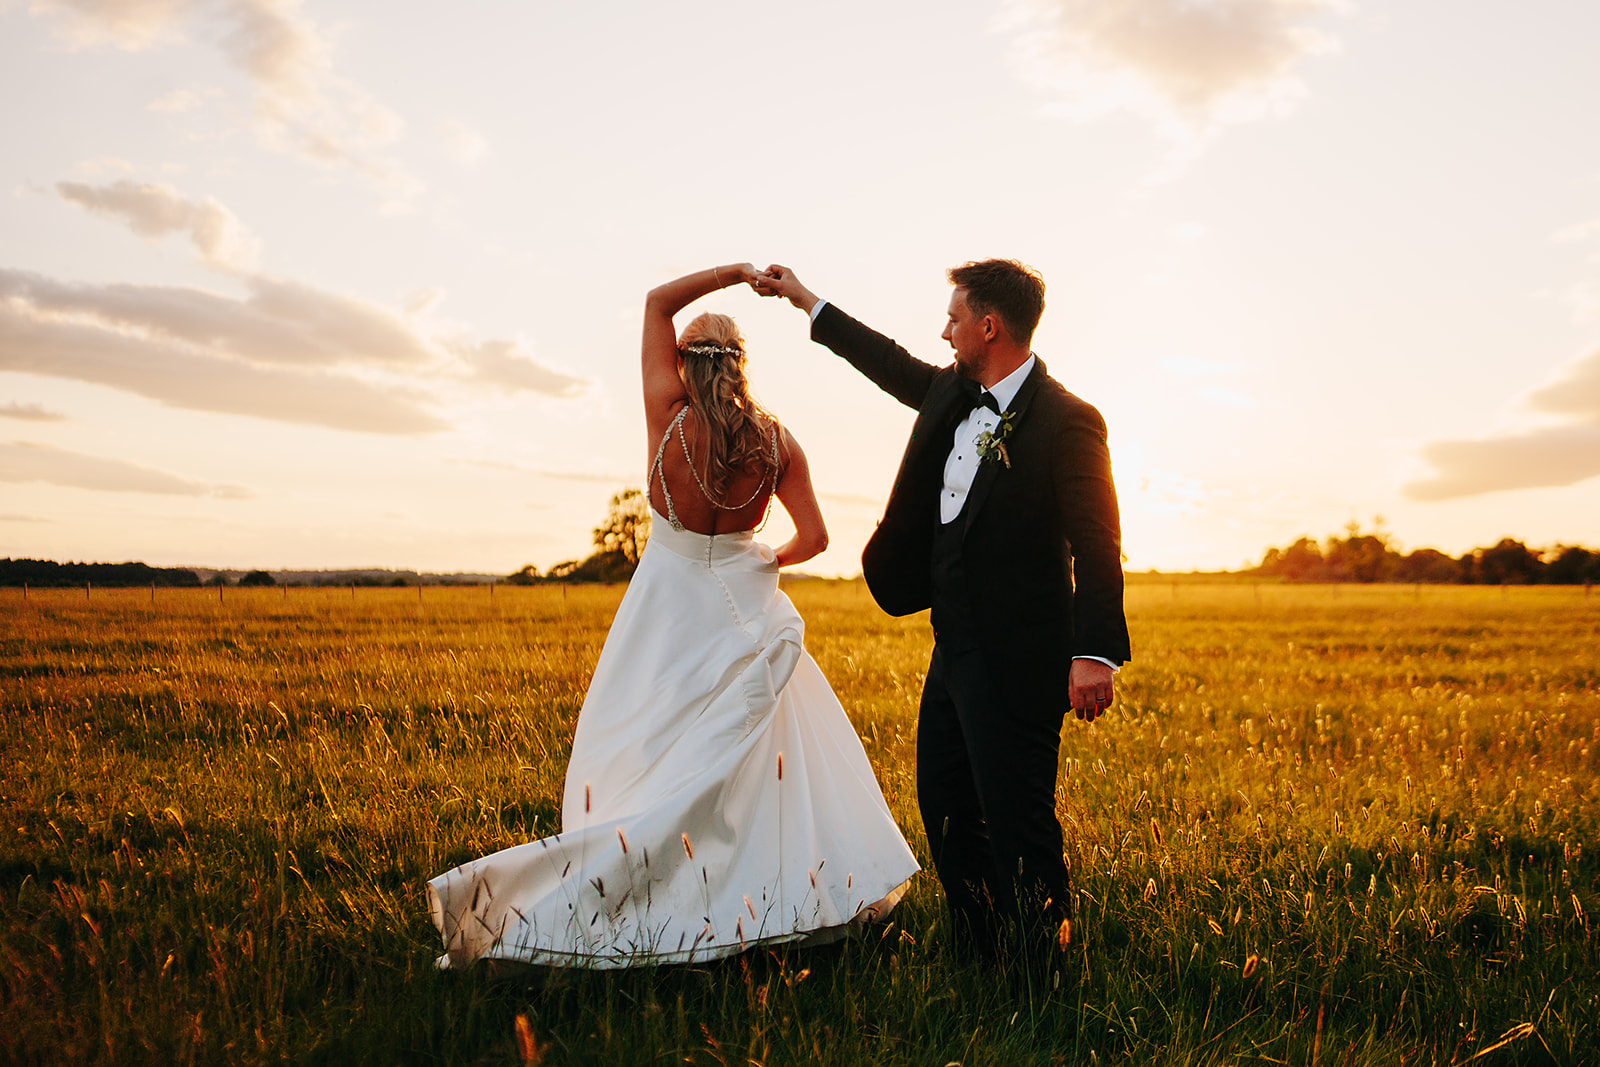 hornington manor wedding bride and groom sunset picture dancing